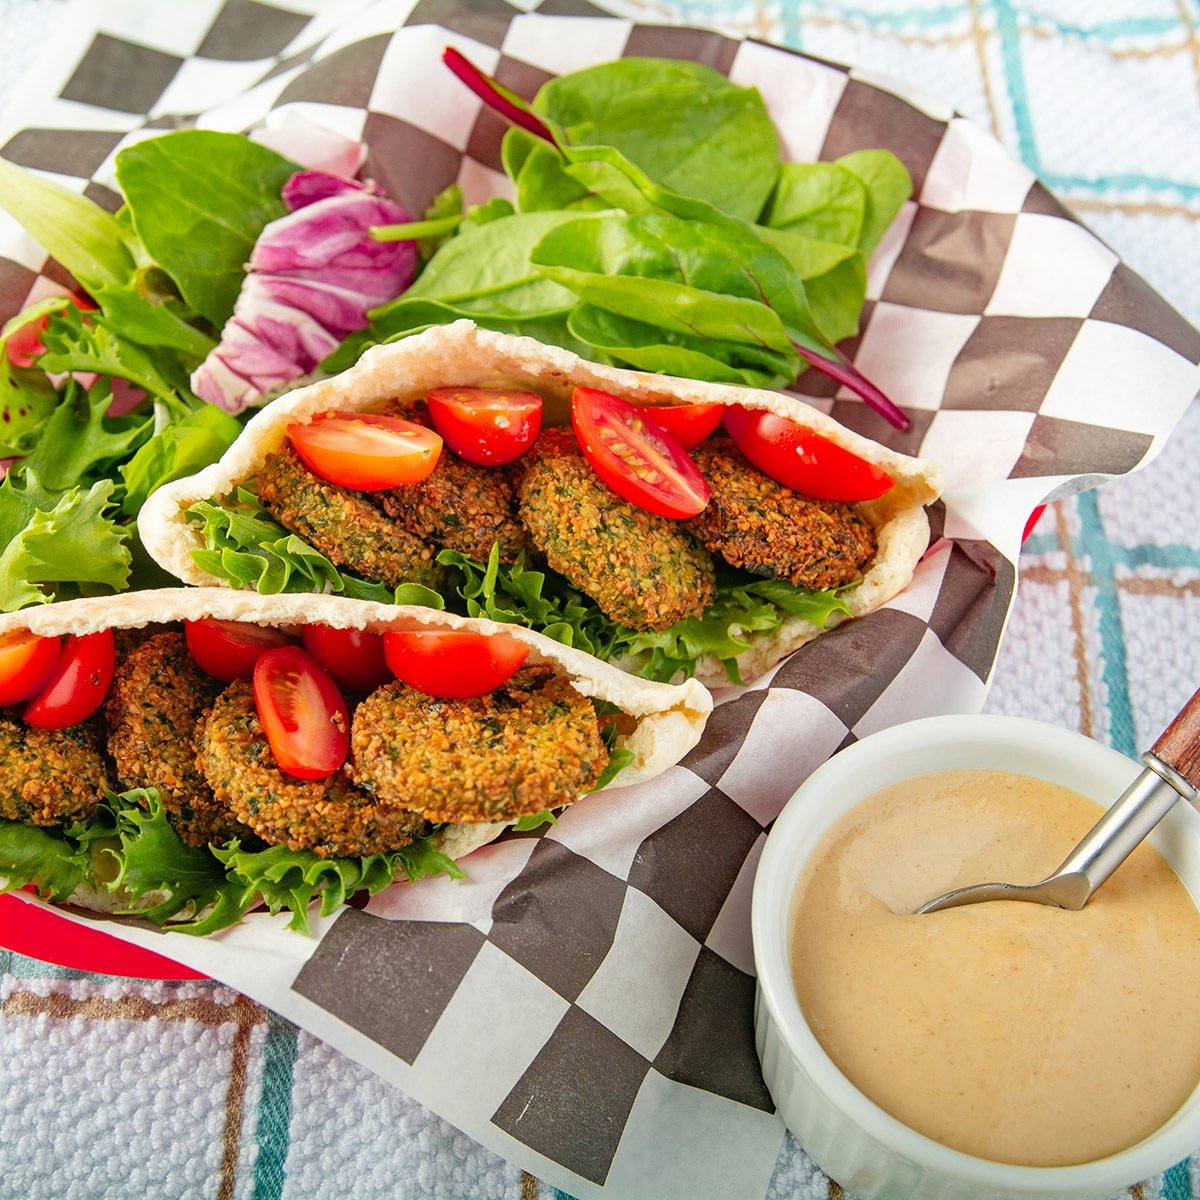 Falafel sandwich in a basket with sauce on the side